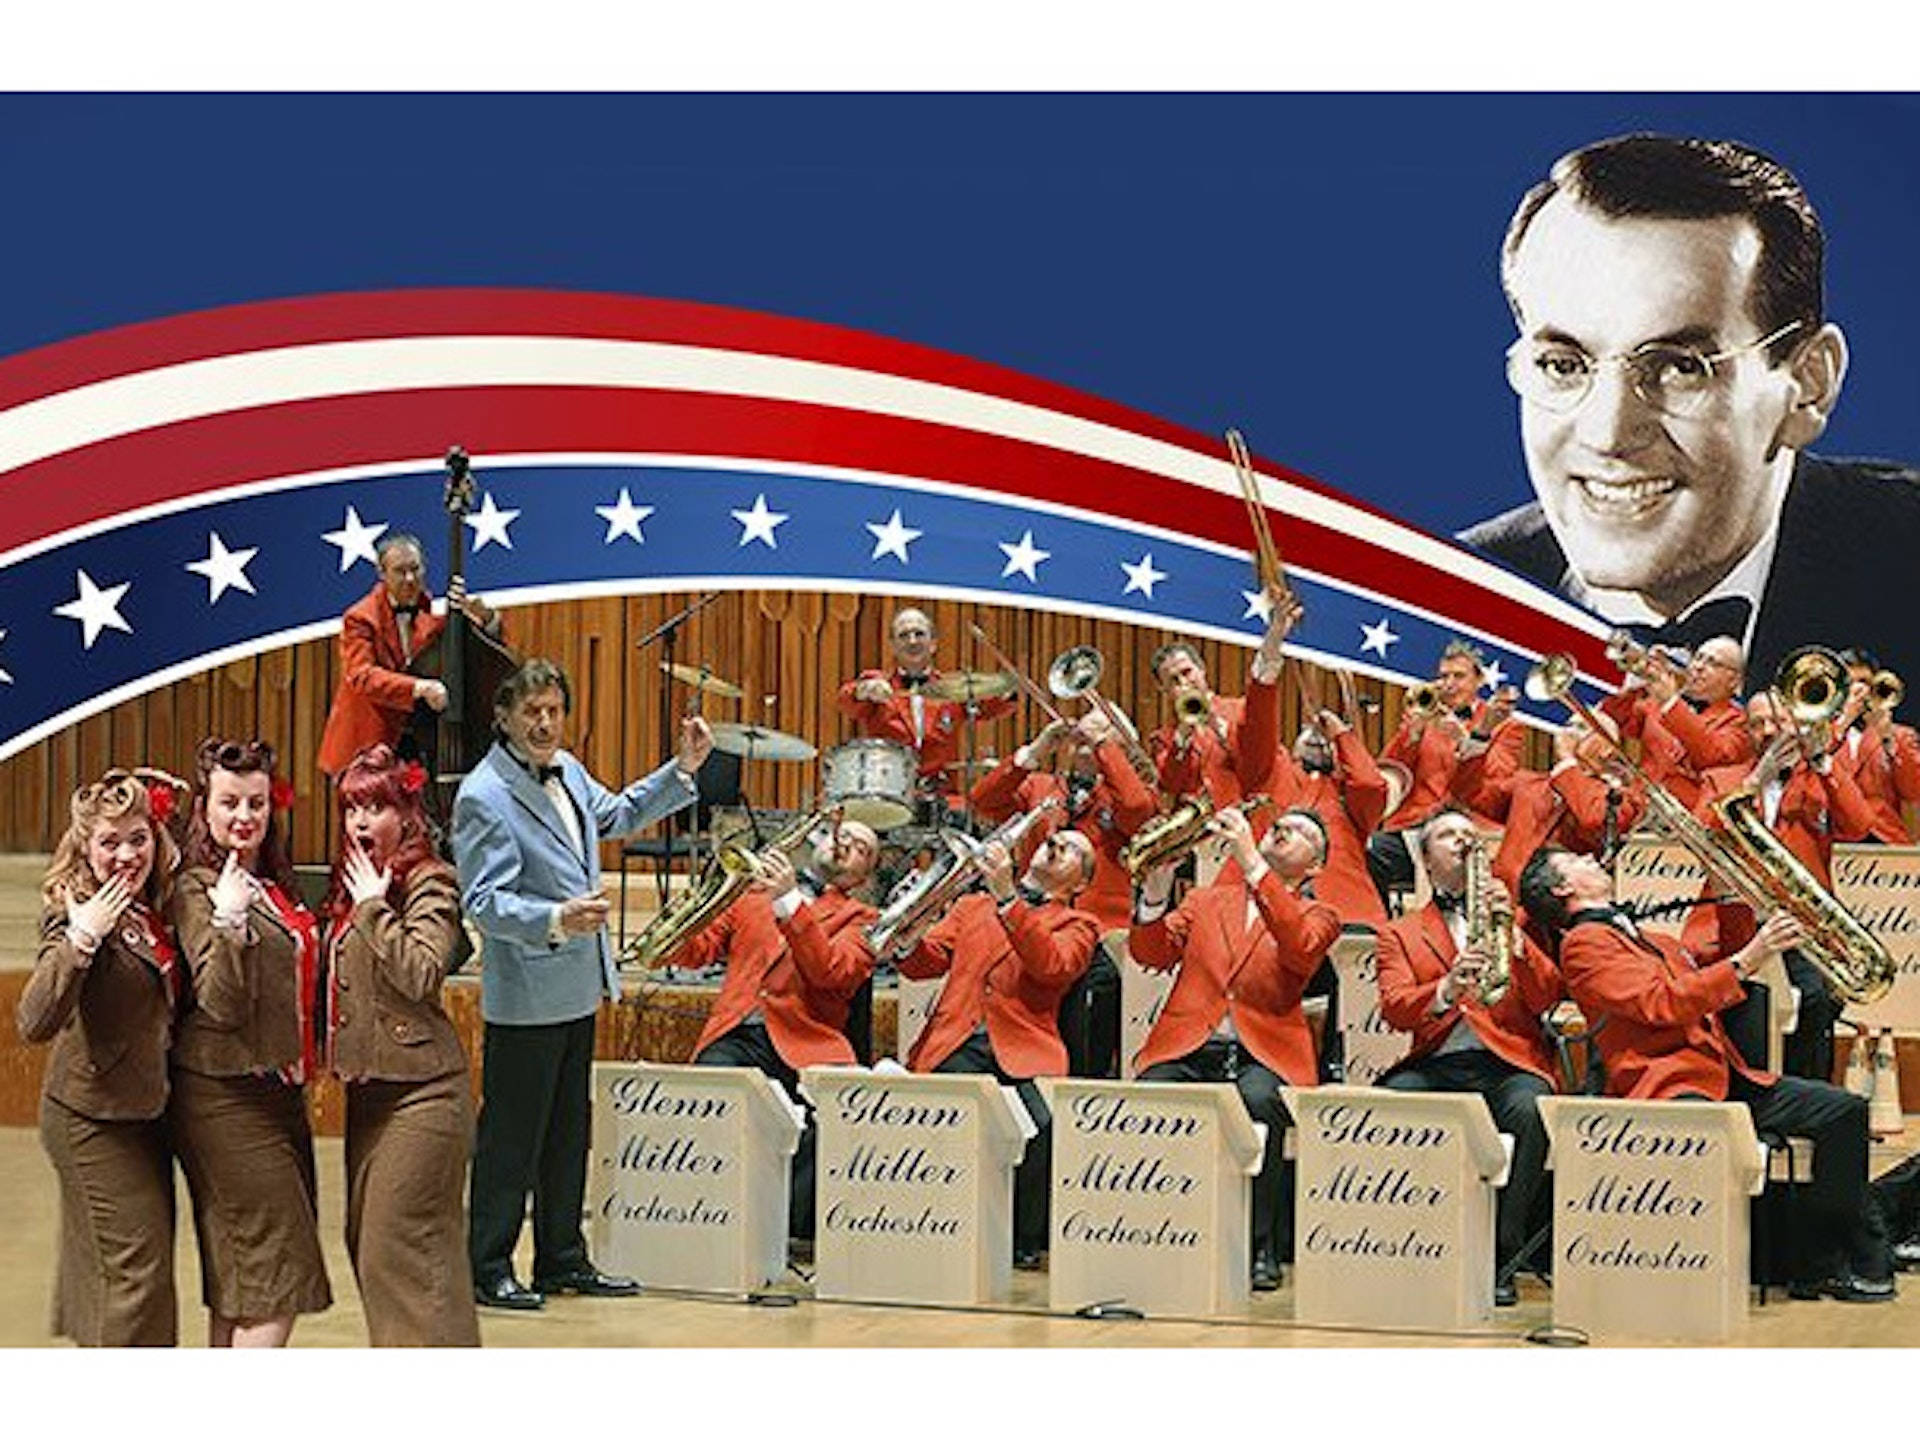 The Glenn Miller Orchestra performing on stage. Wallpaper